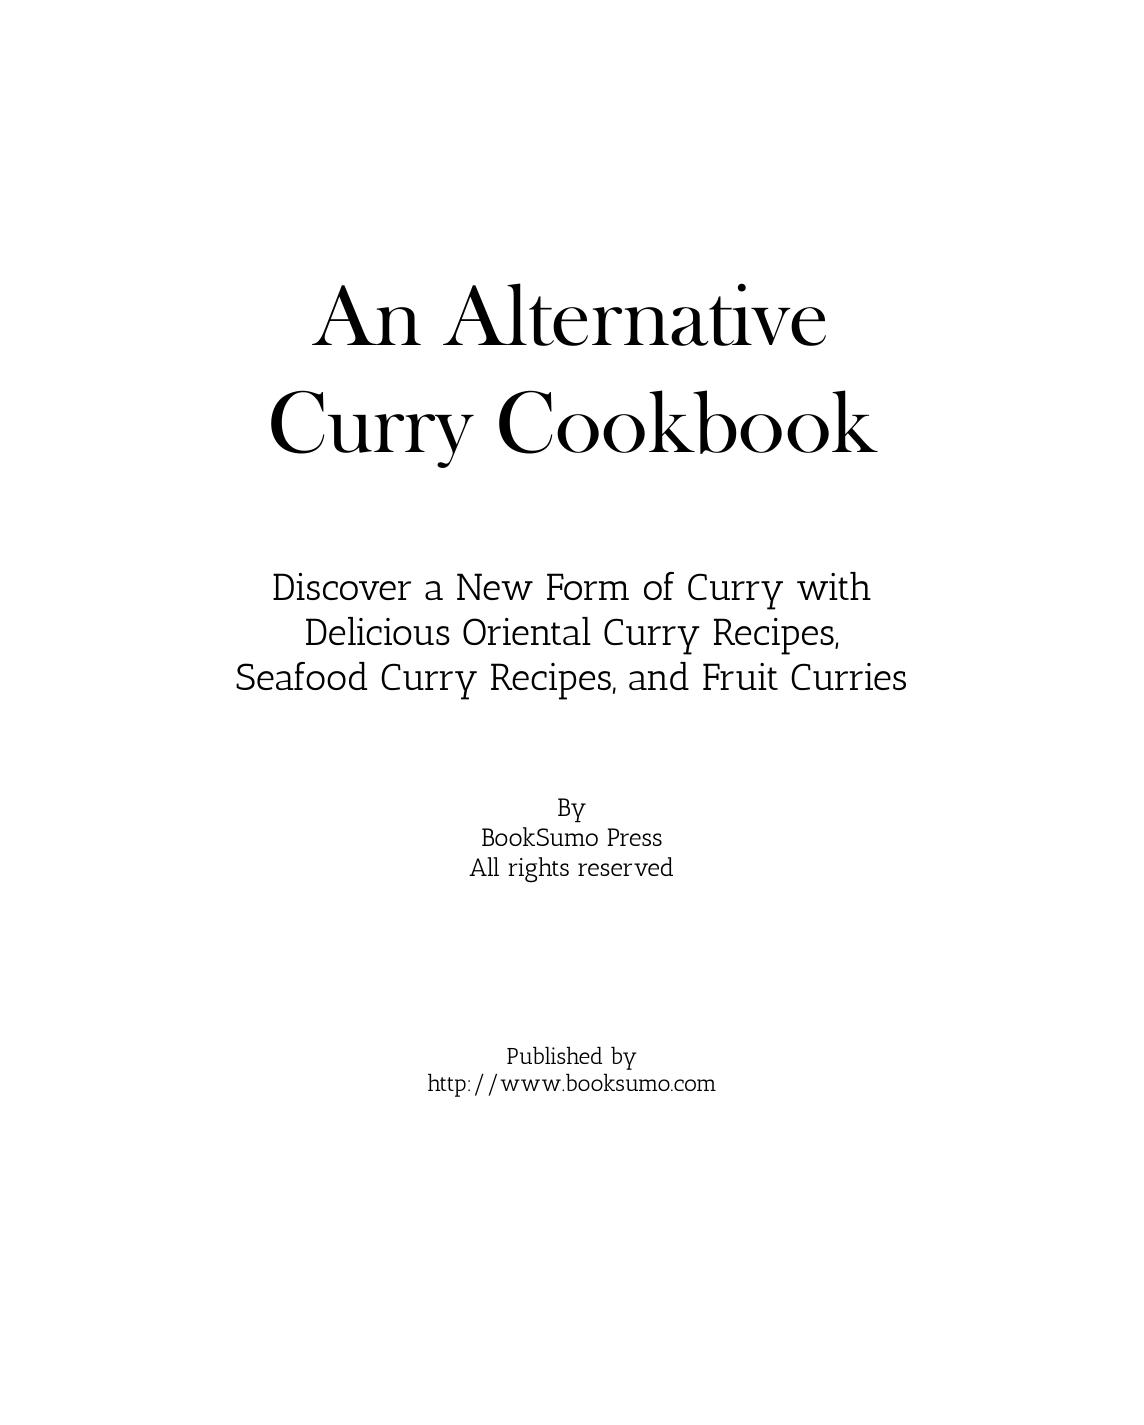 An Alternative Curry Cookbook: Discover New Styles of Delicious Curries like Oriental, Seafood, and Fruit by BookSumo Press